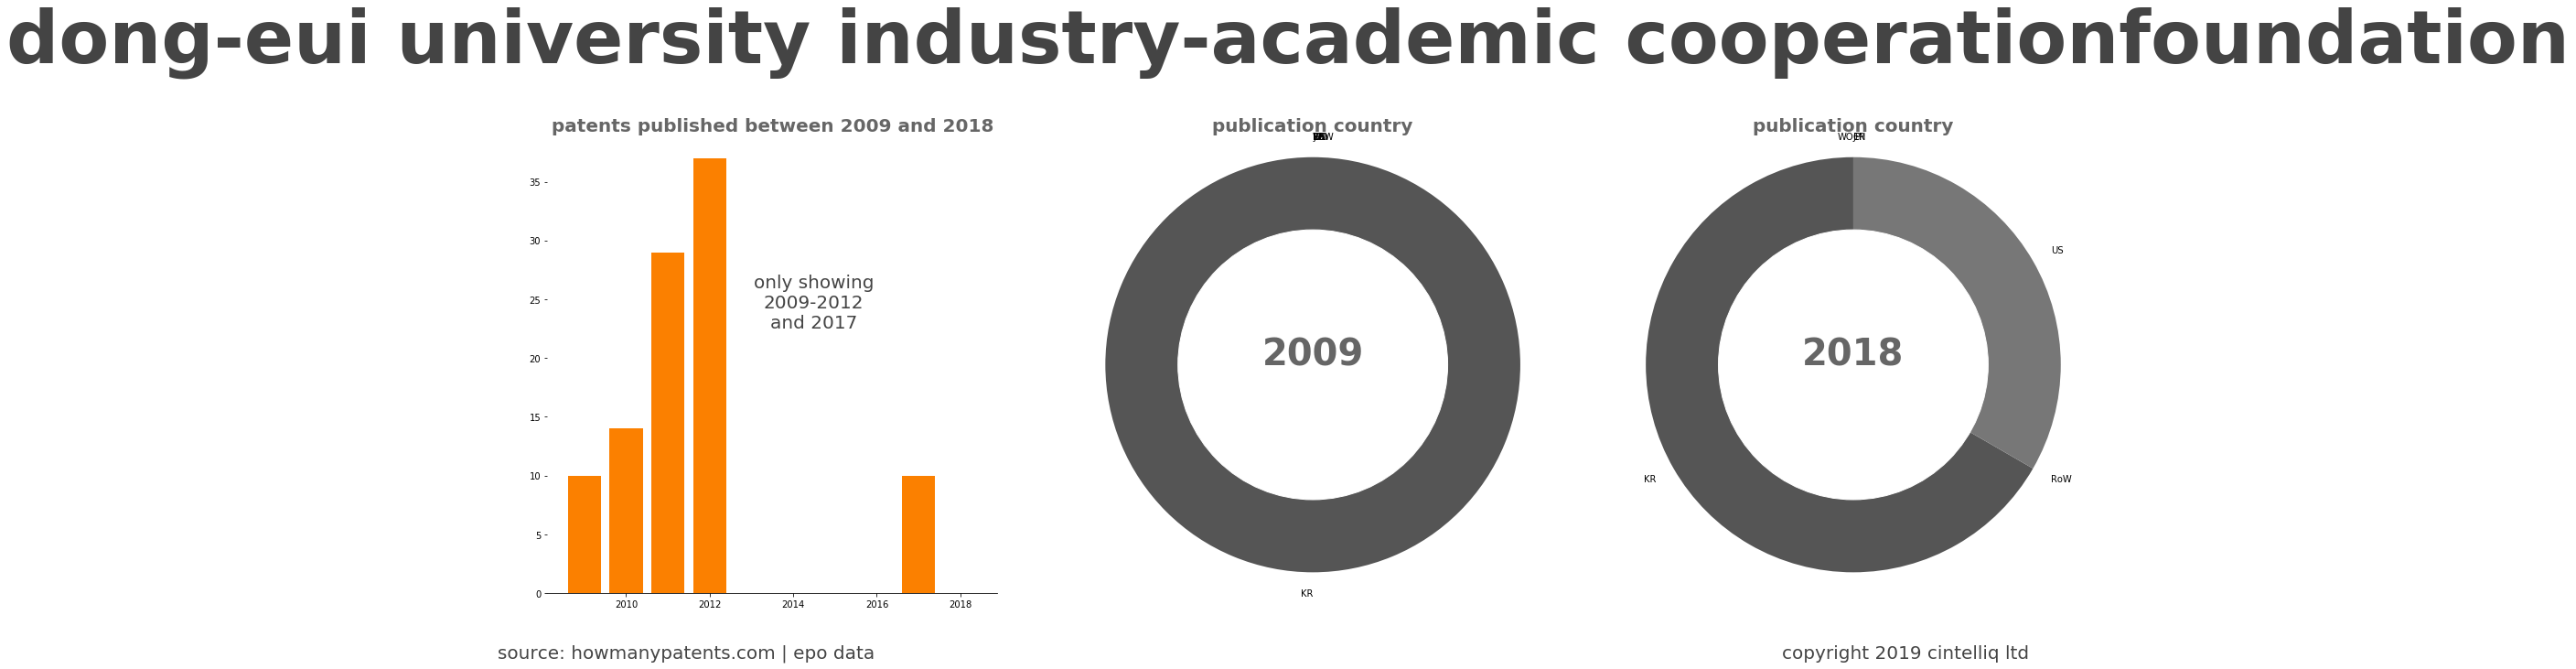 summary of patents for Dong-Eui University Industry-Academic Cooperationfoundation